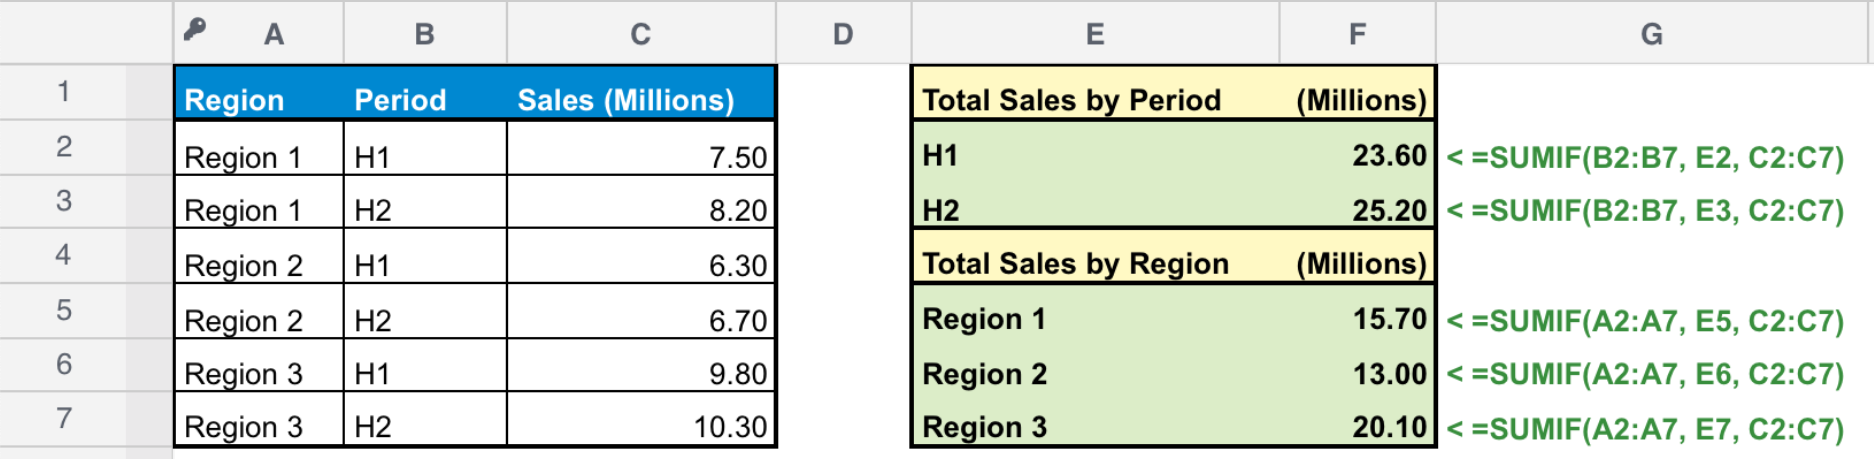 SUMIF-Sales-Data.png